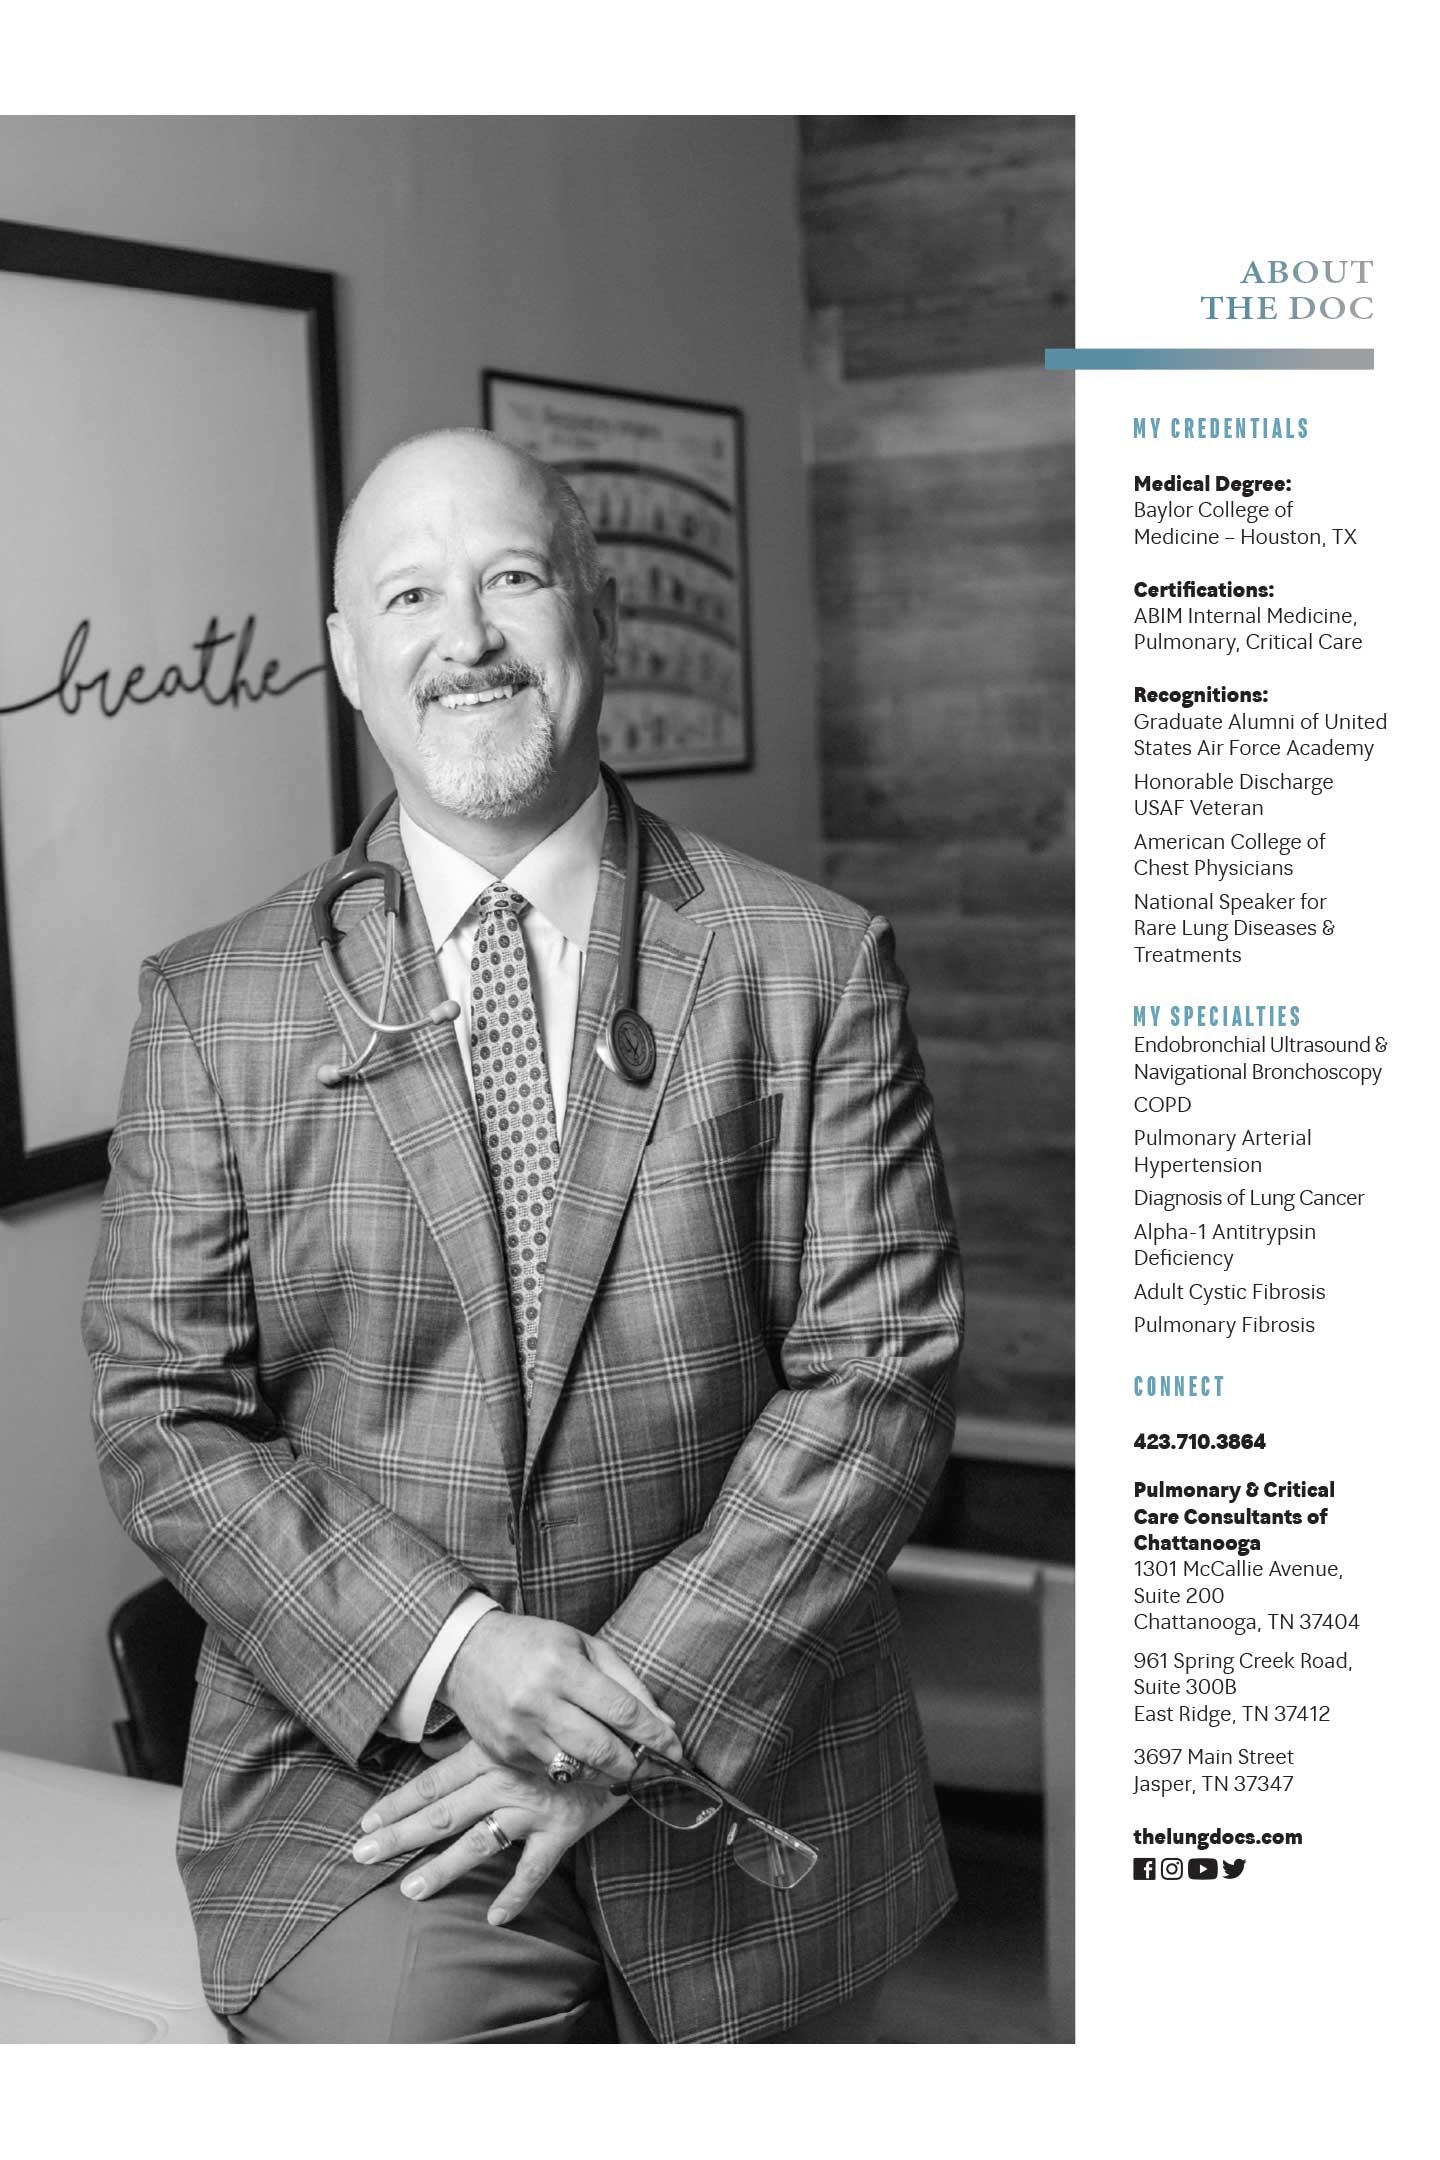 about Dr. Michael T. Czarnecki at Pulmonary & Critical Care Consultants of Chattanooga